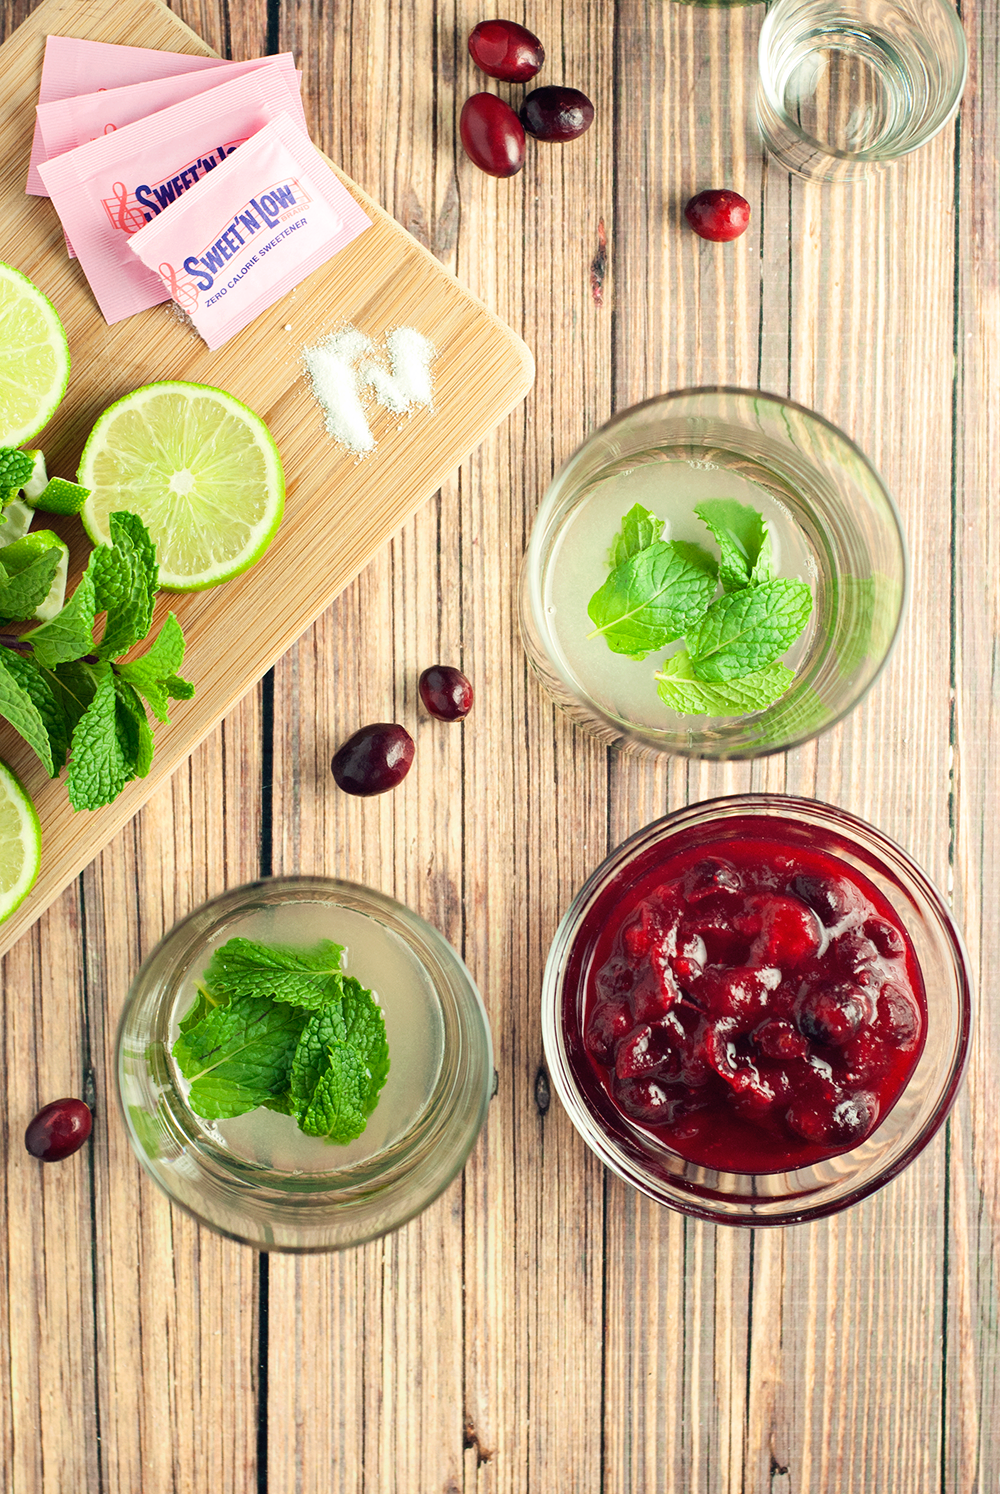 Start the night off right with this amazing Cranberry Mojito!